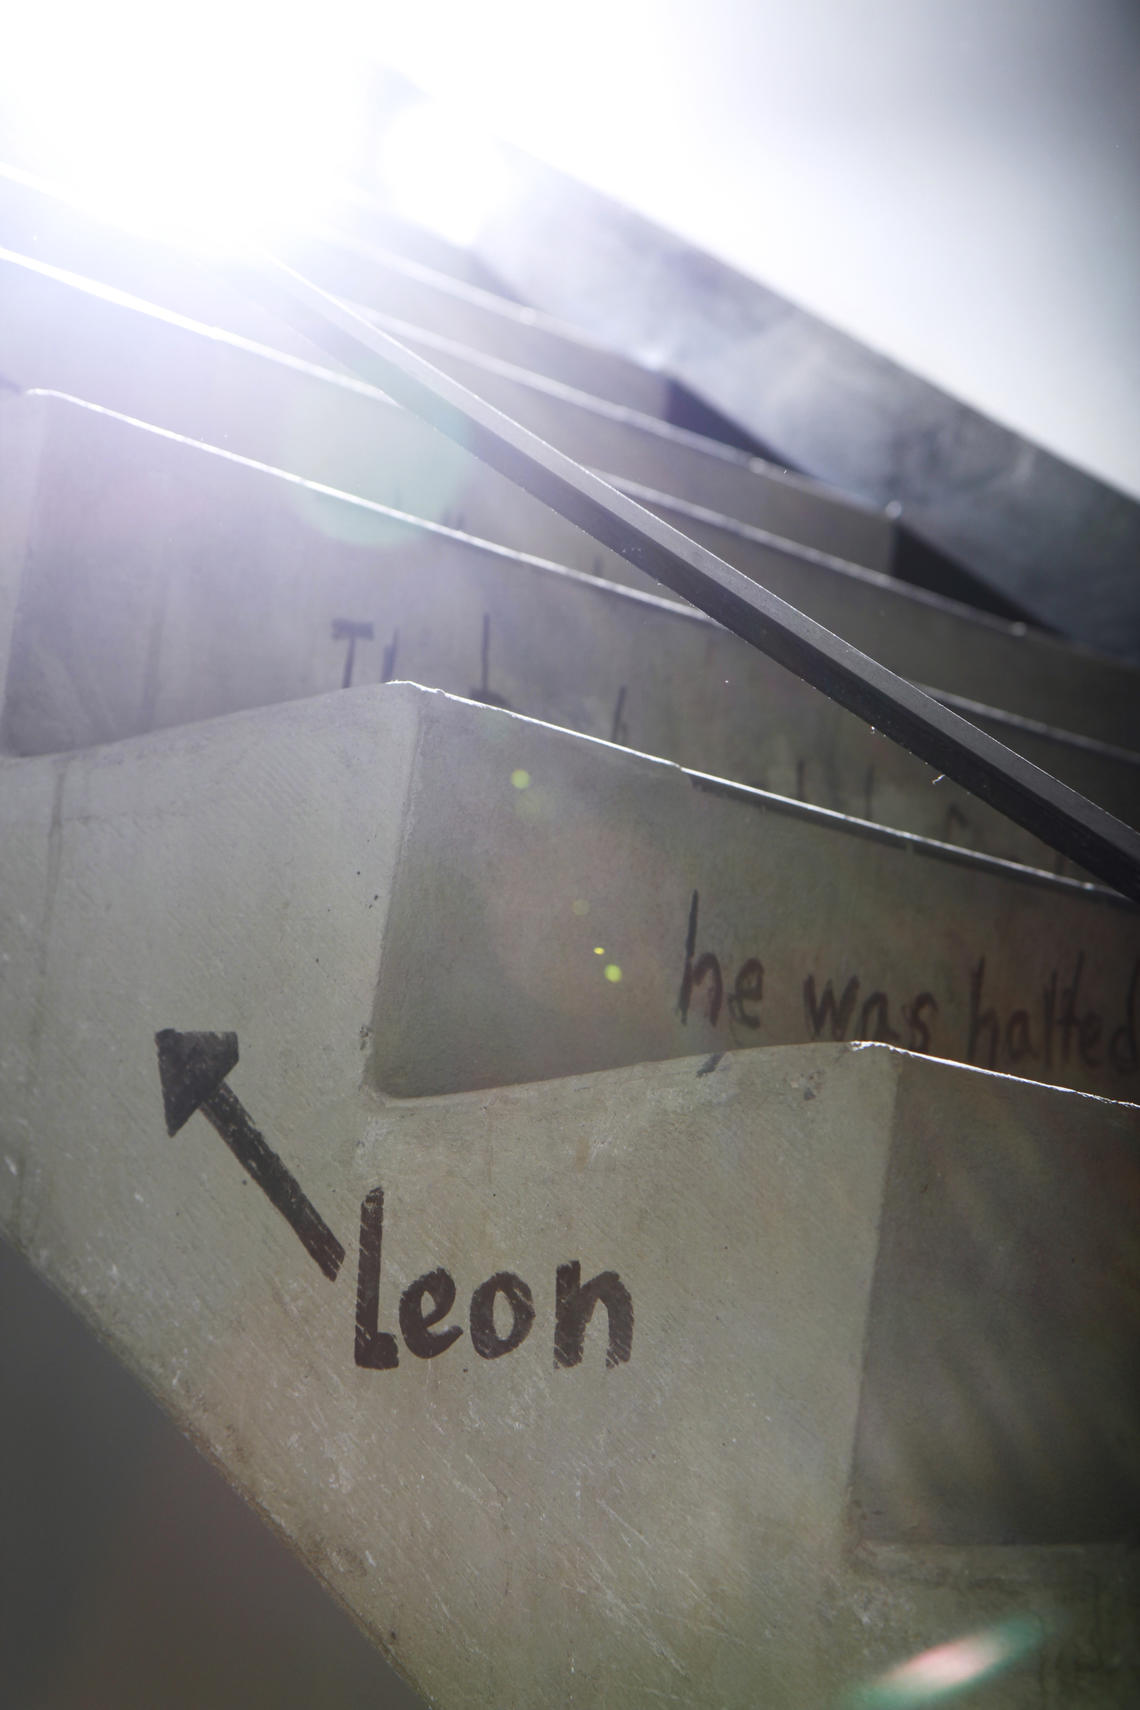 Sideview of the Social Sciences stairs featuring the original Leon the Frog poem. The name "Leon" is writen in black marker, with an arrow pointing upwwards.